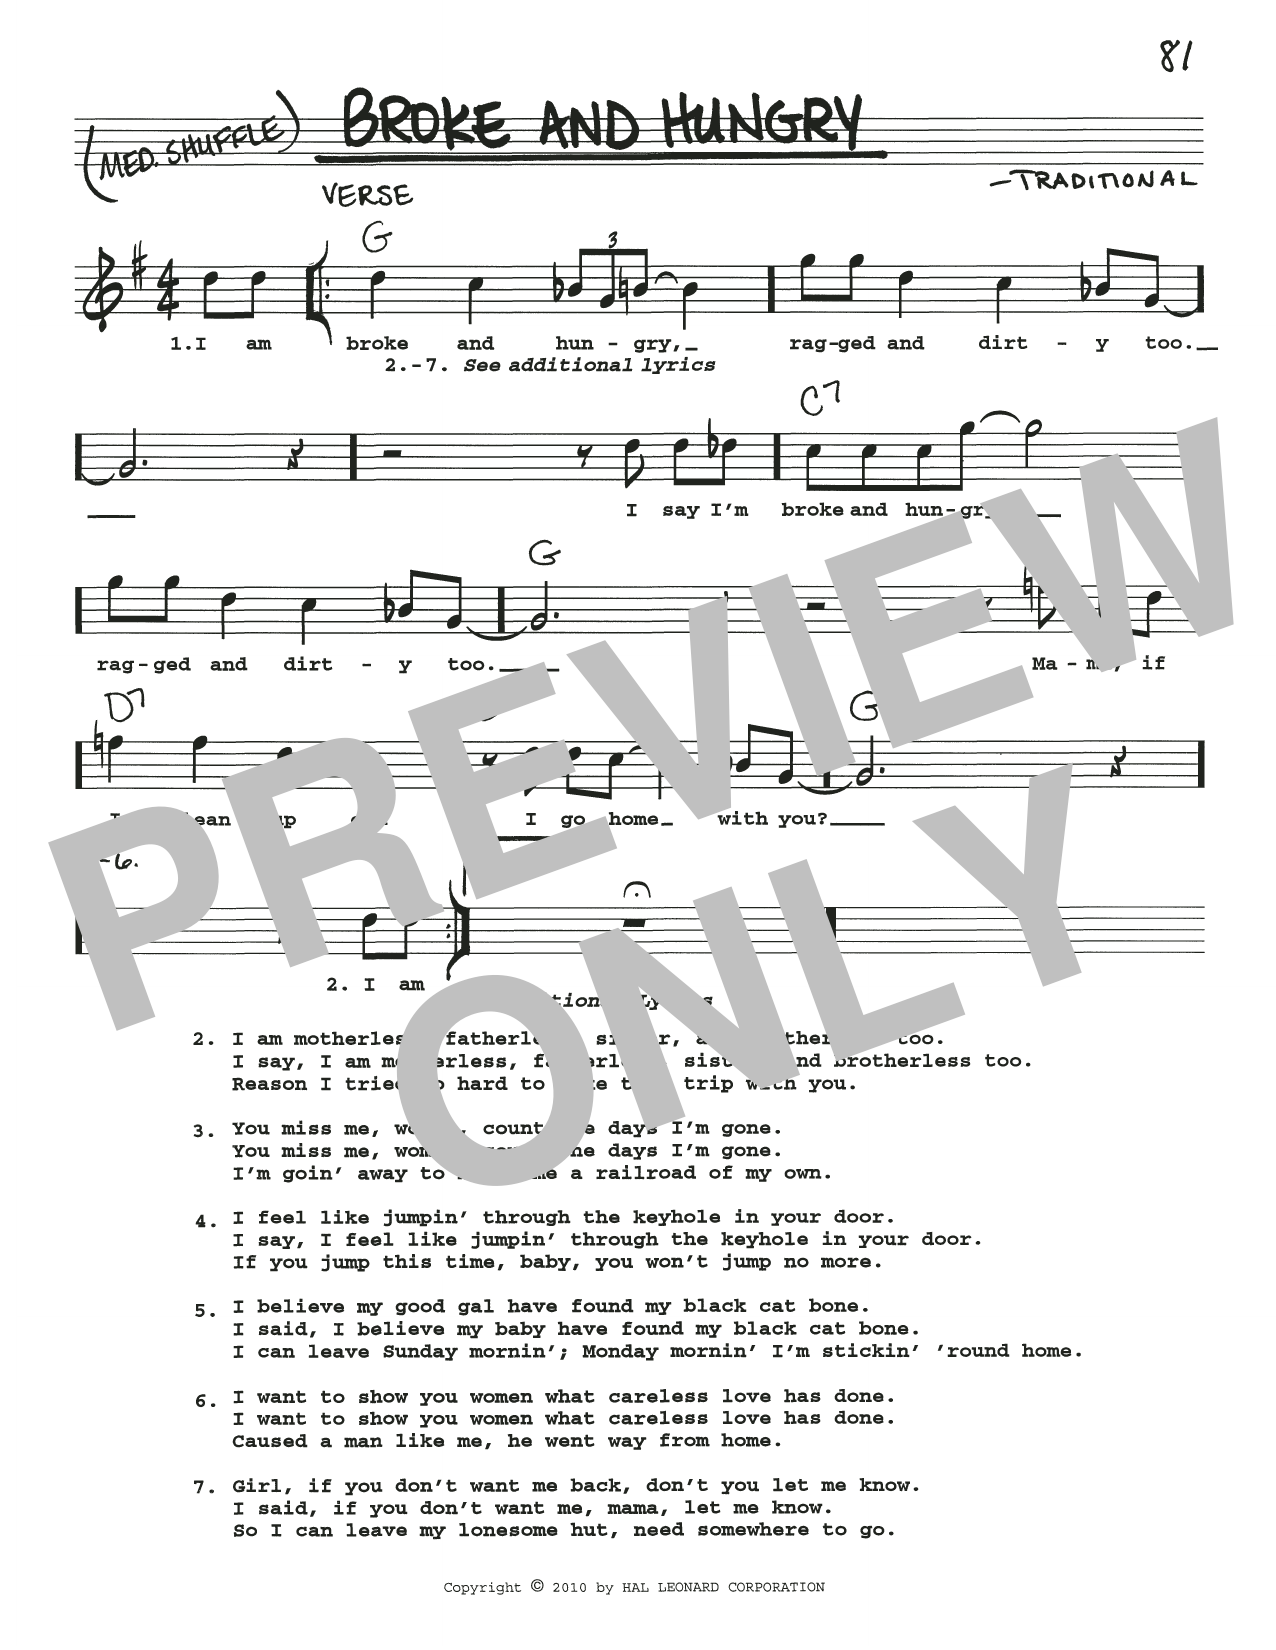 Download Traditional Broke And Hungry Sheet Music